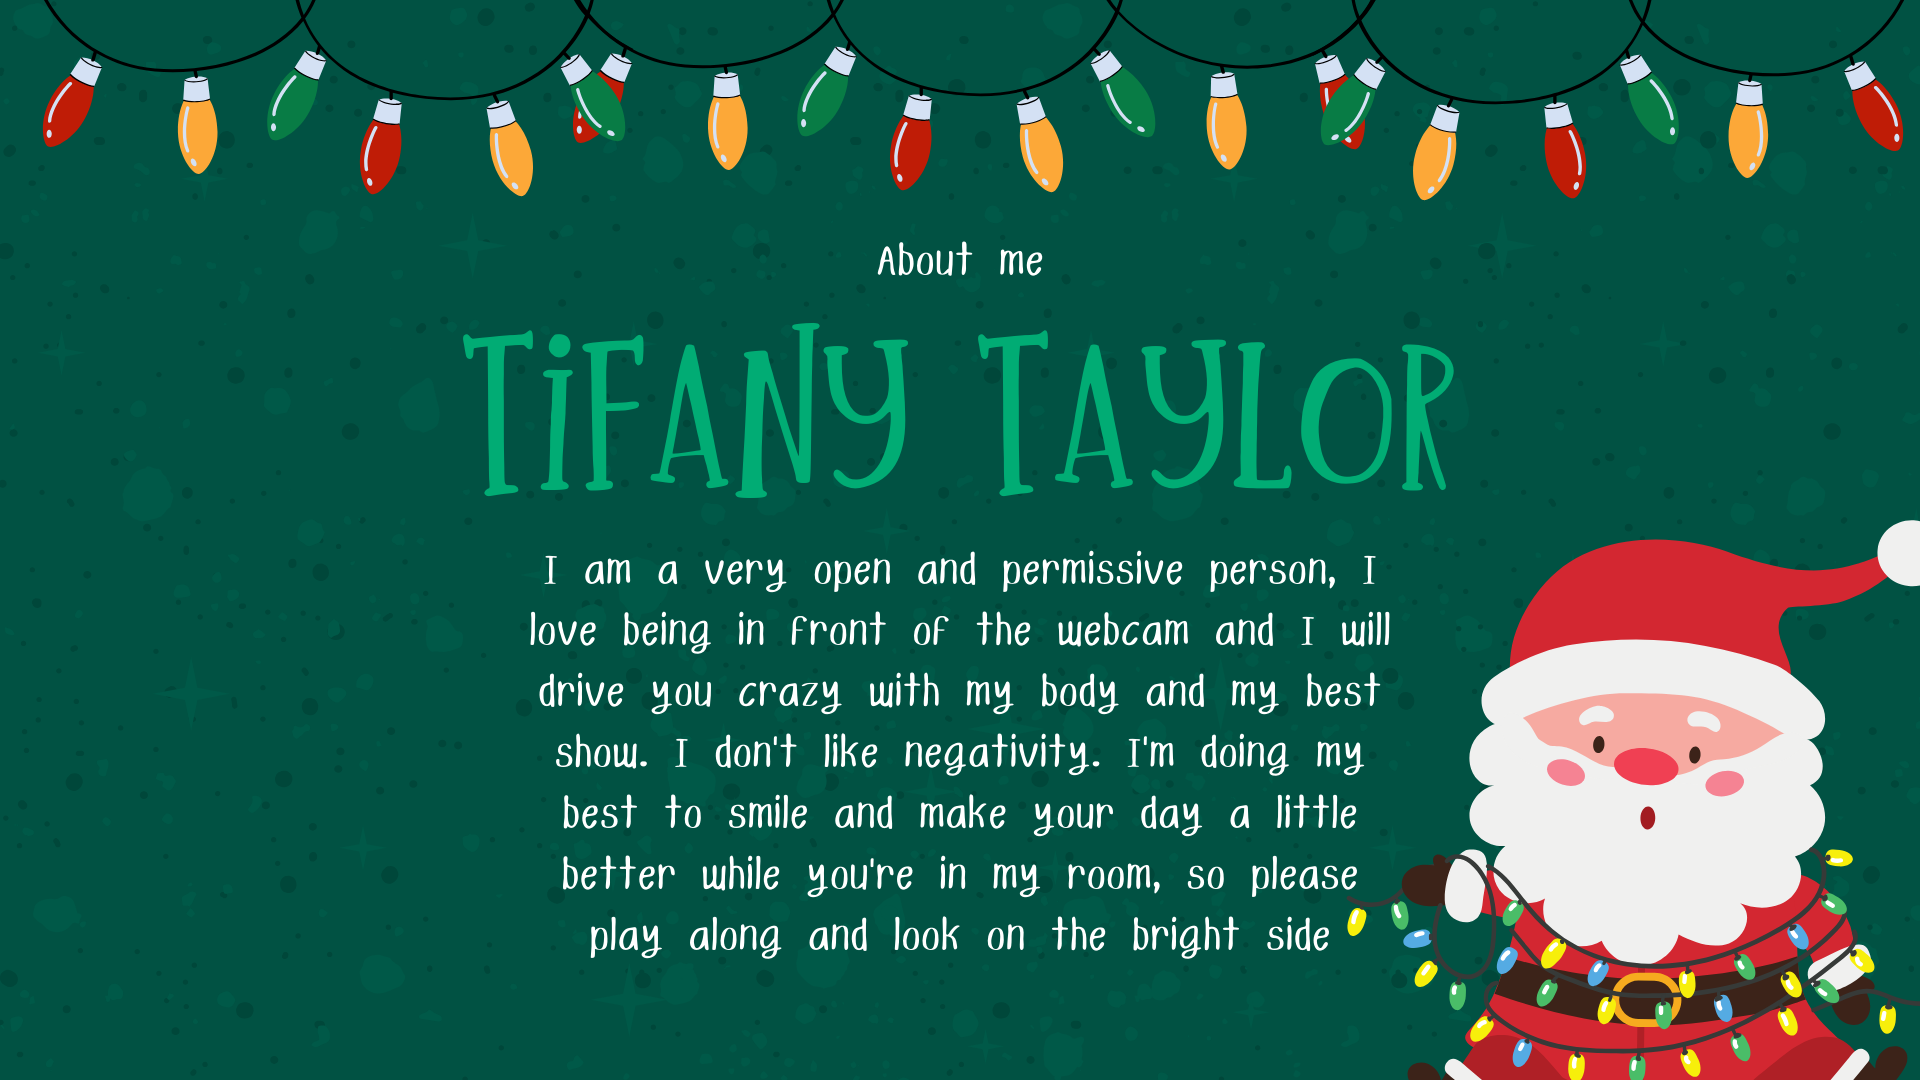 TifanyTaylor ABOUT ME image: 1